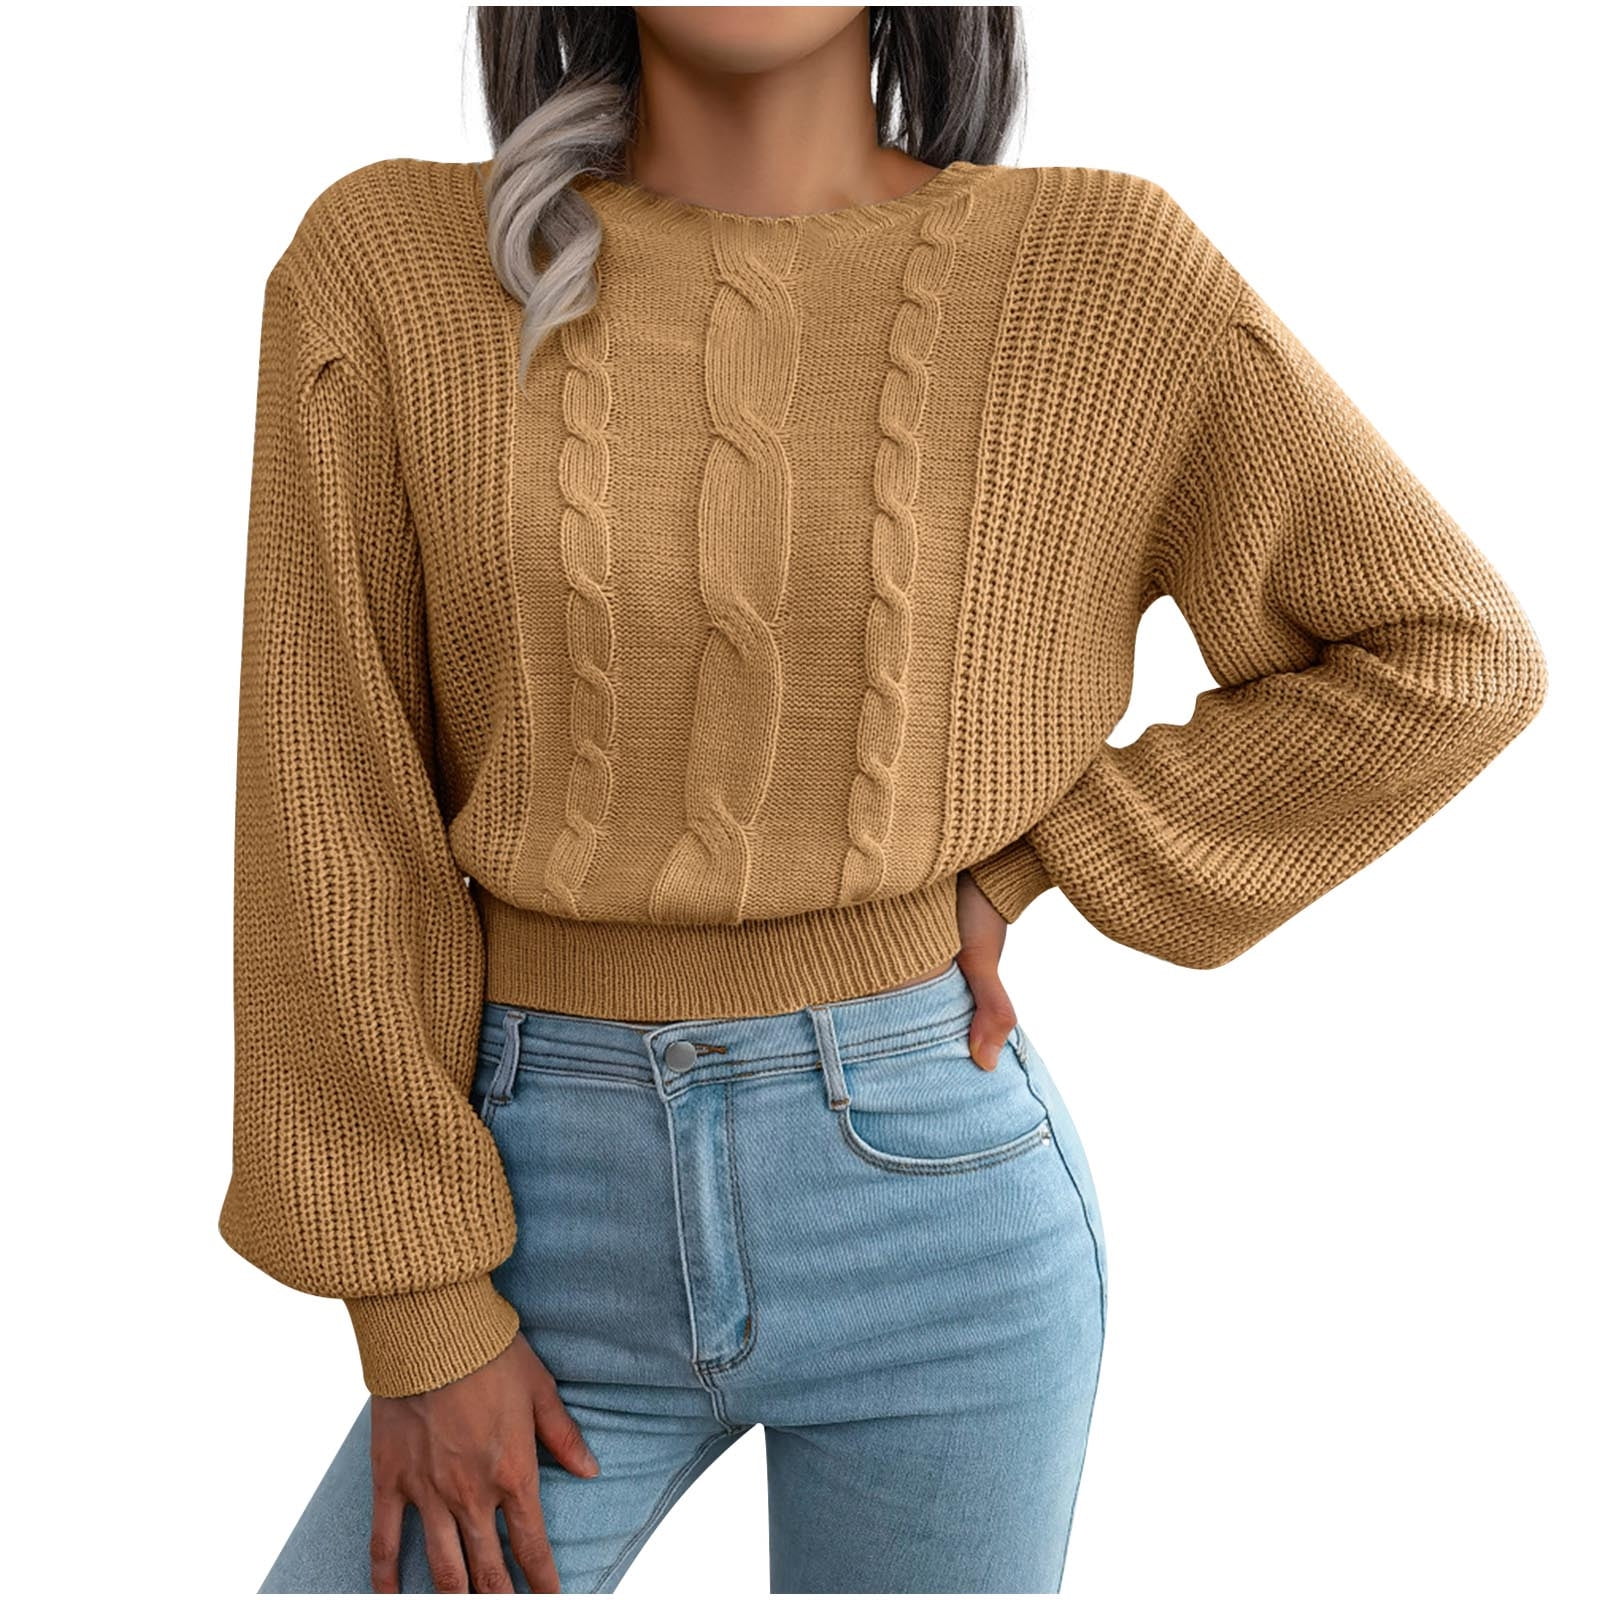 Juebong Cropped Sweater Tops for Women Casual Solid Round Neck Long Sleeve  Short Sweaters Autumn Winter Warm Soft Pullover Blouse Sweatshirts for Teen